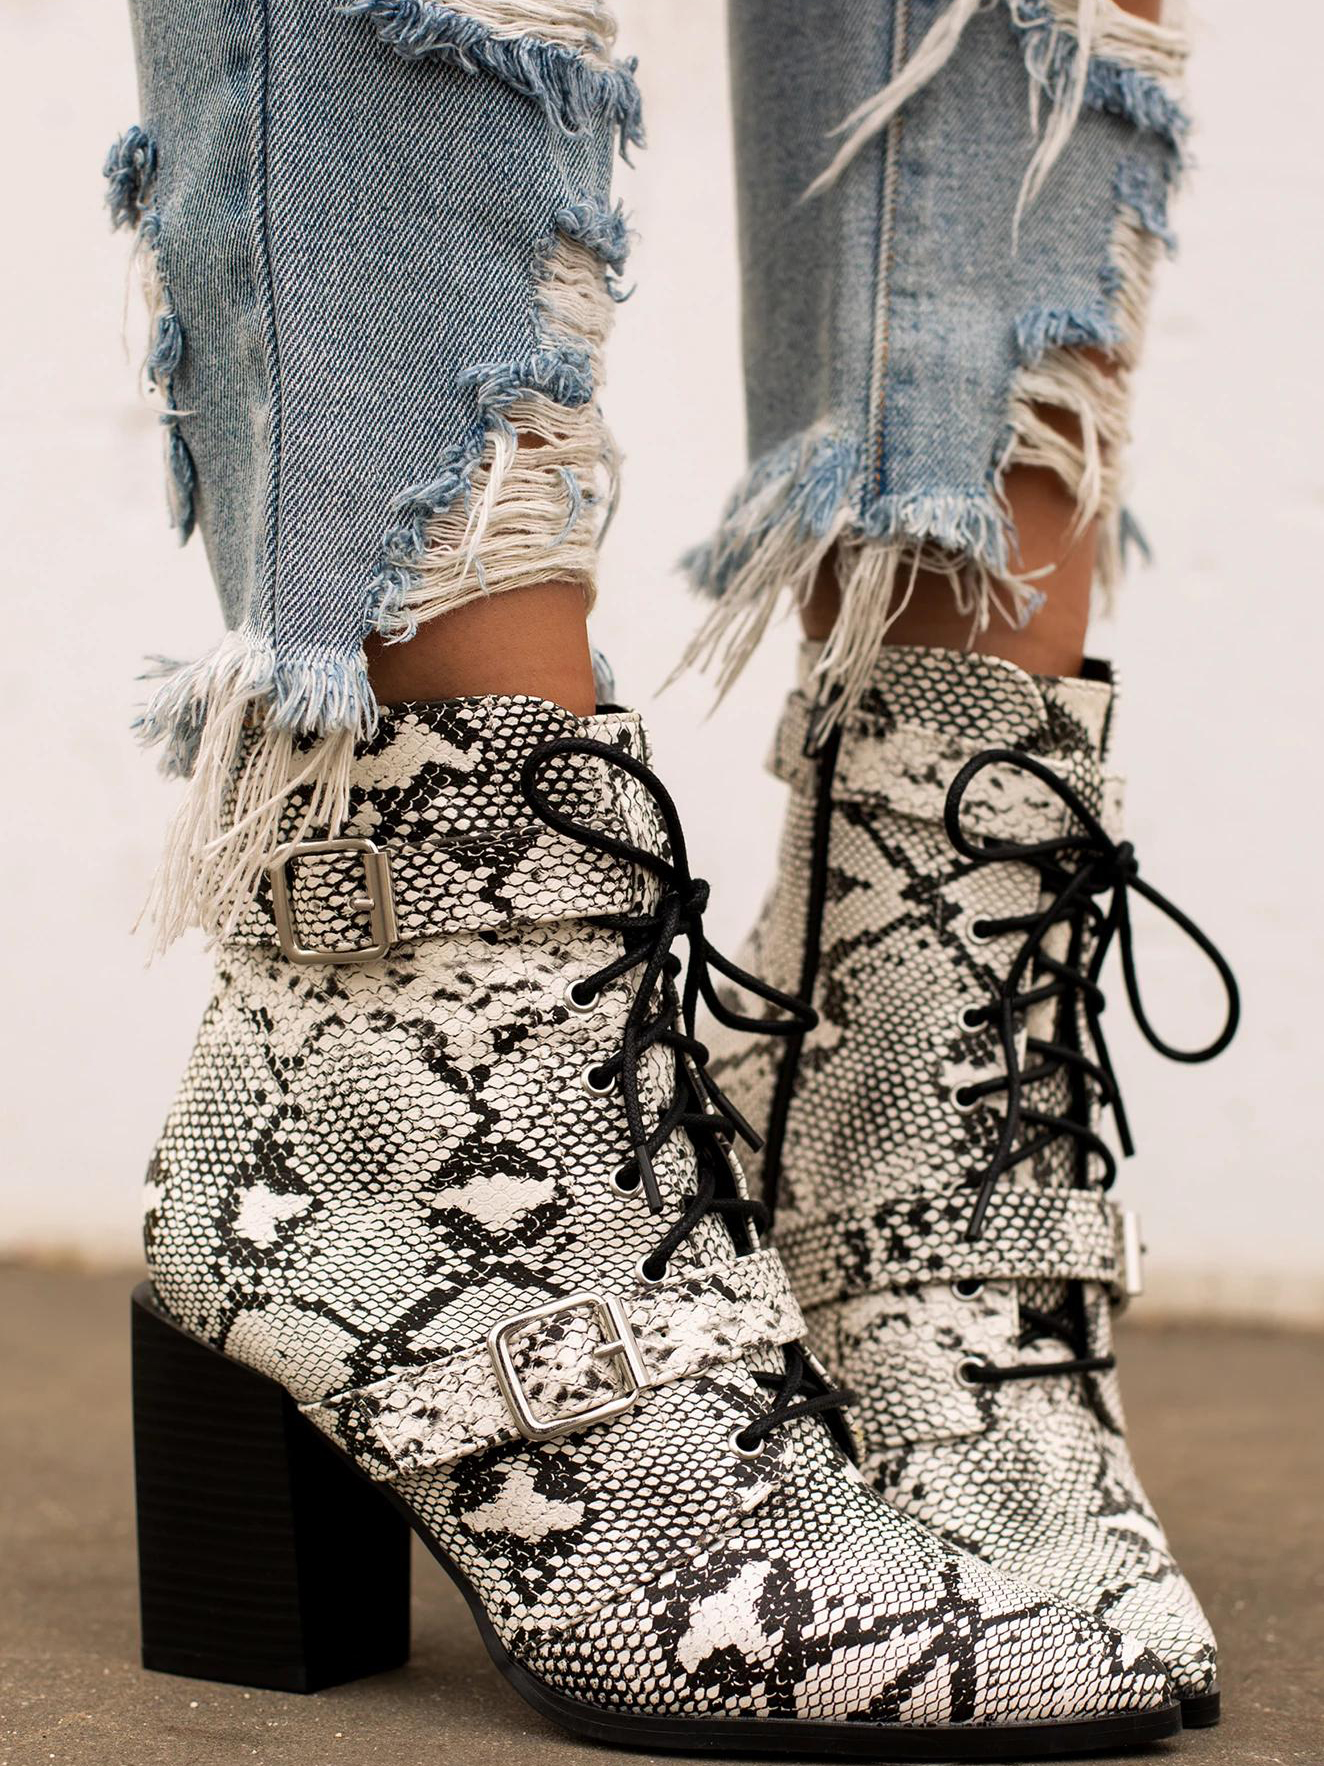 snakeskin booties with buckles